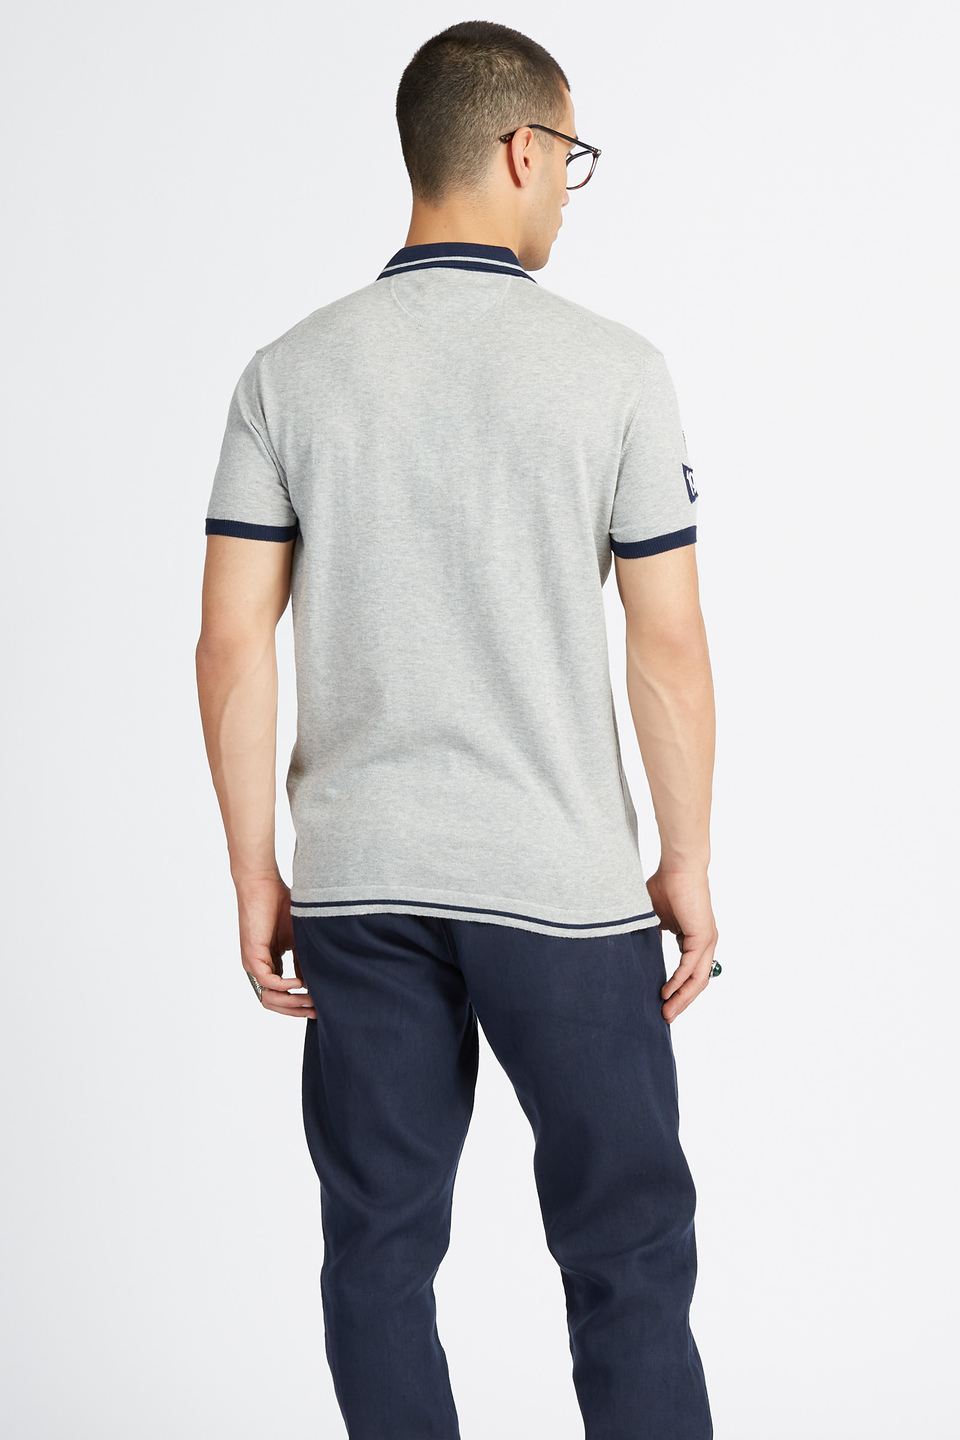 Short-sleeved men's tricot sweater in solid color Polo Academy - Victorin | La Martina - Official Online Shop